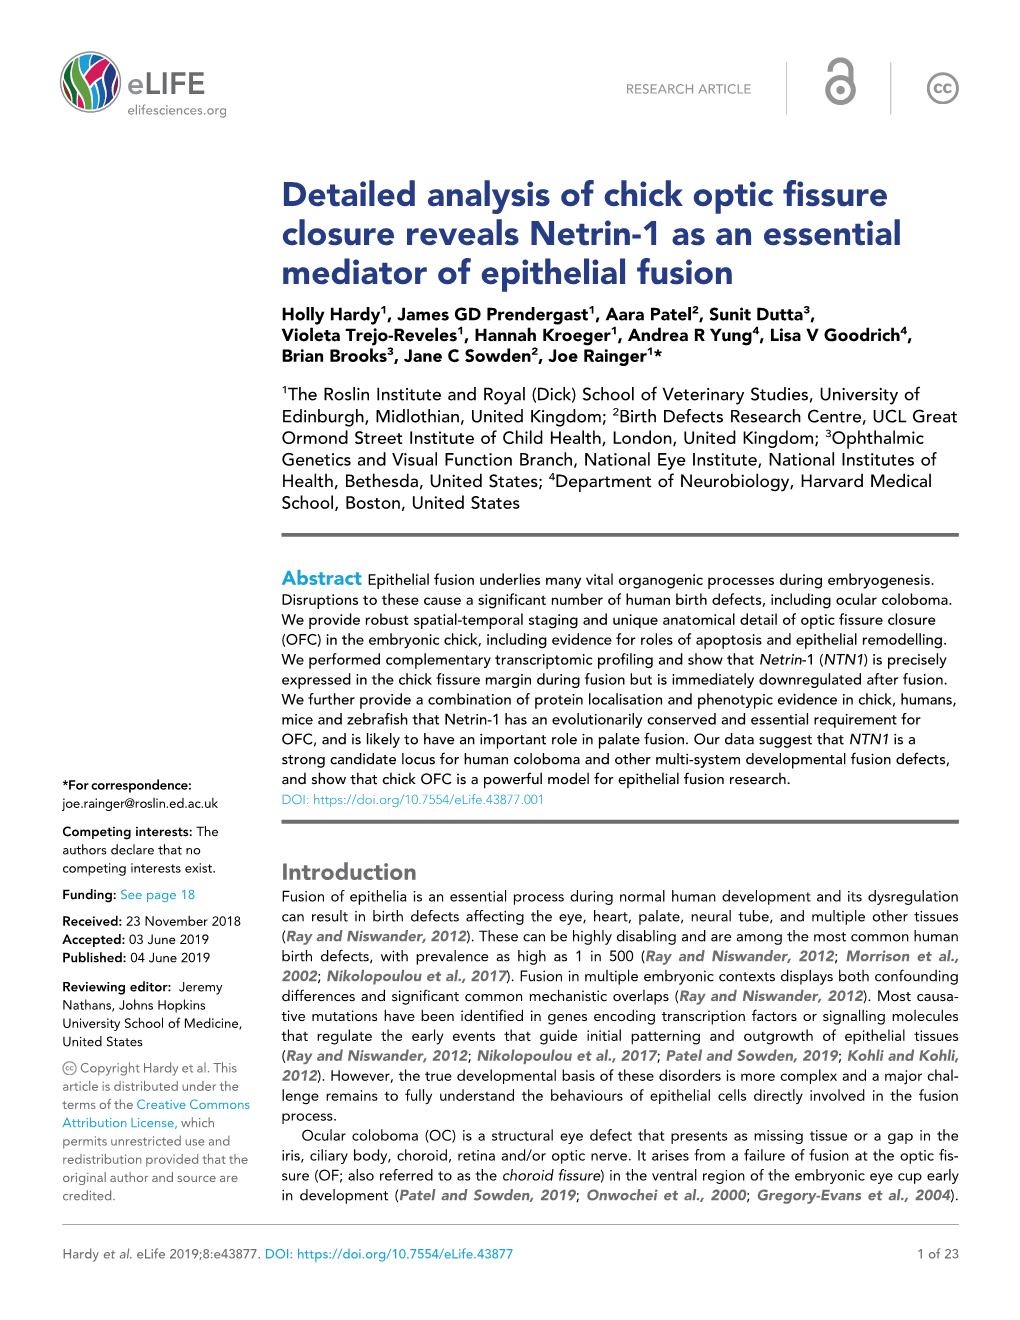 Detailed Analysis of Chick Optic Fissure Closure Reveals Netrin-1 As An